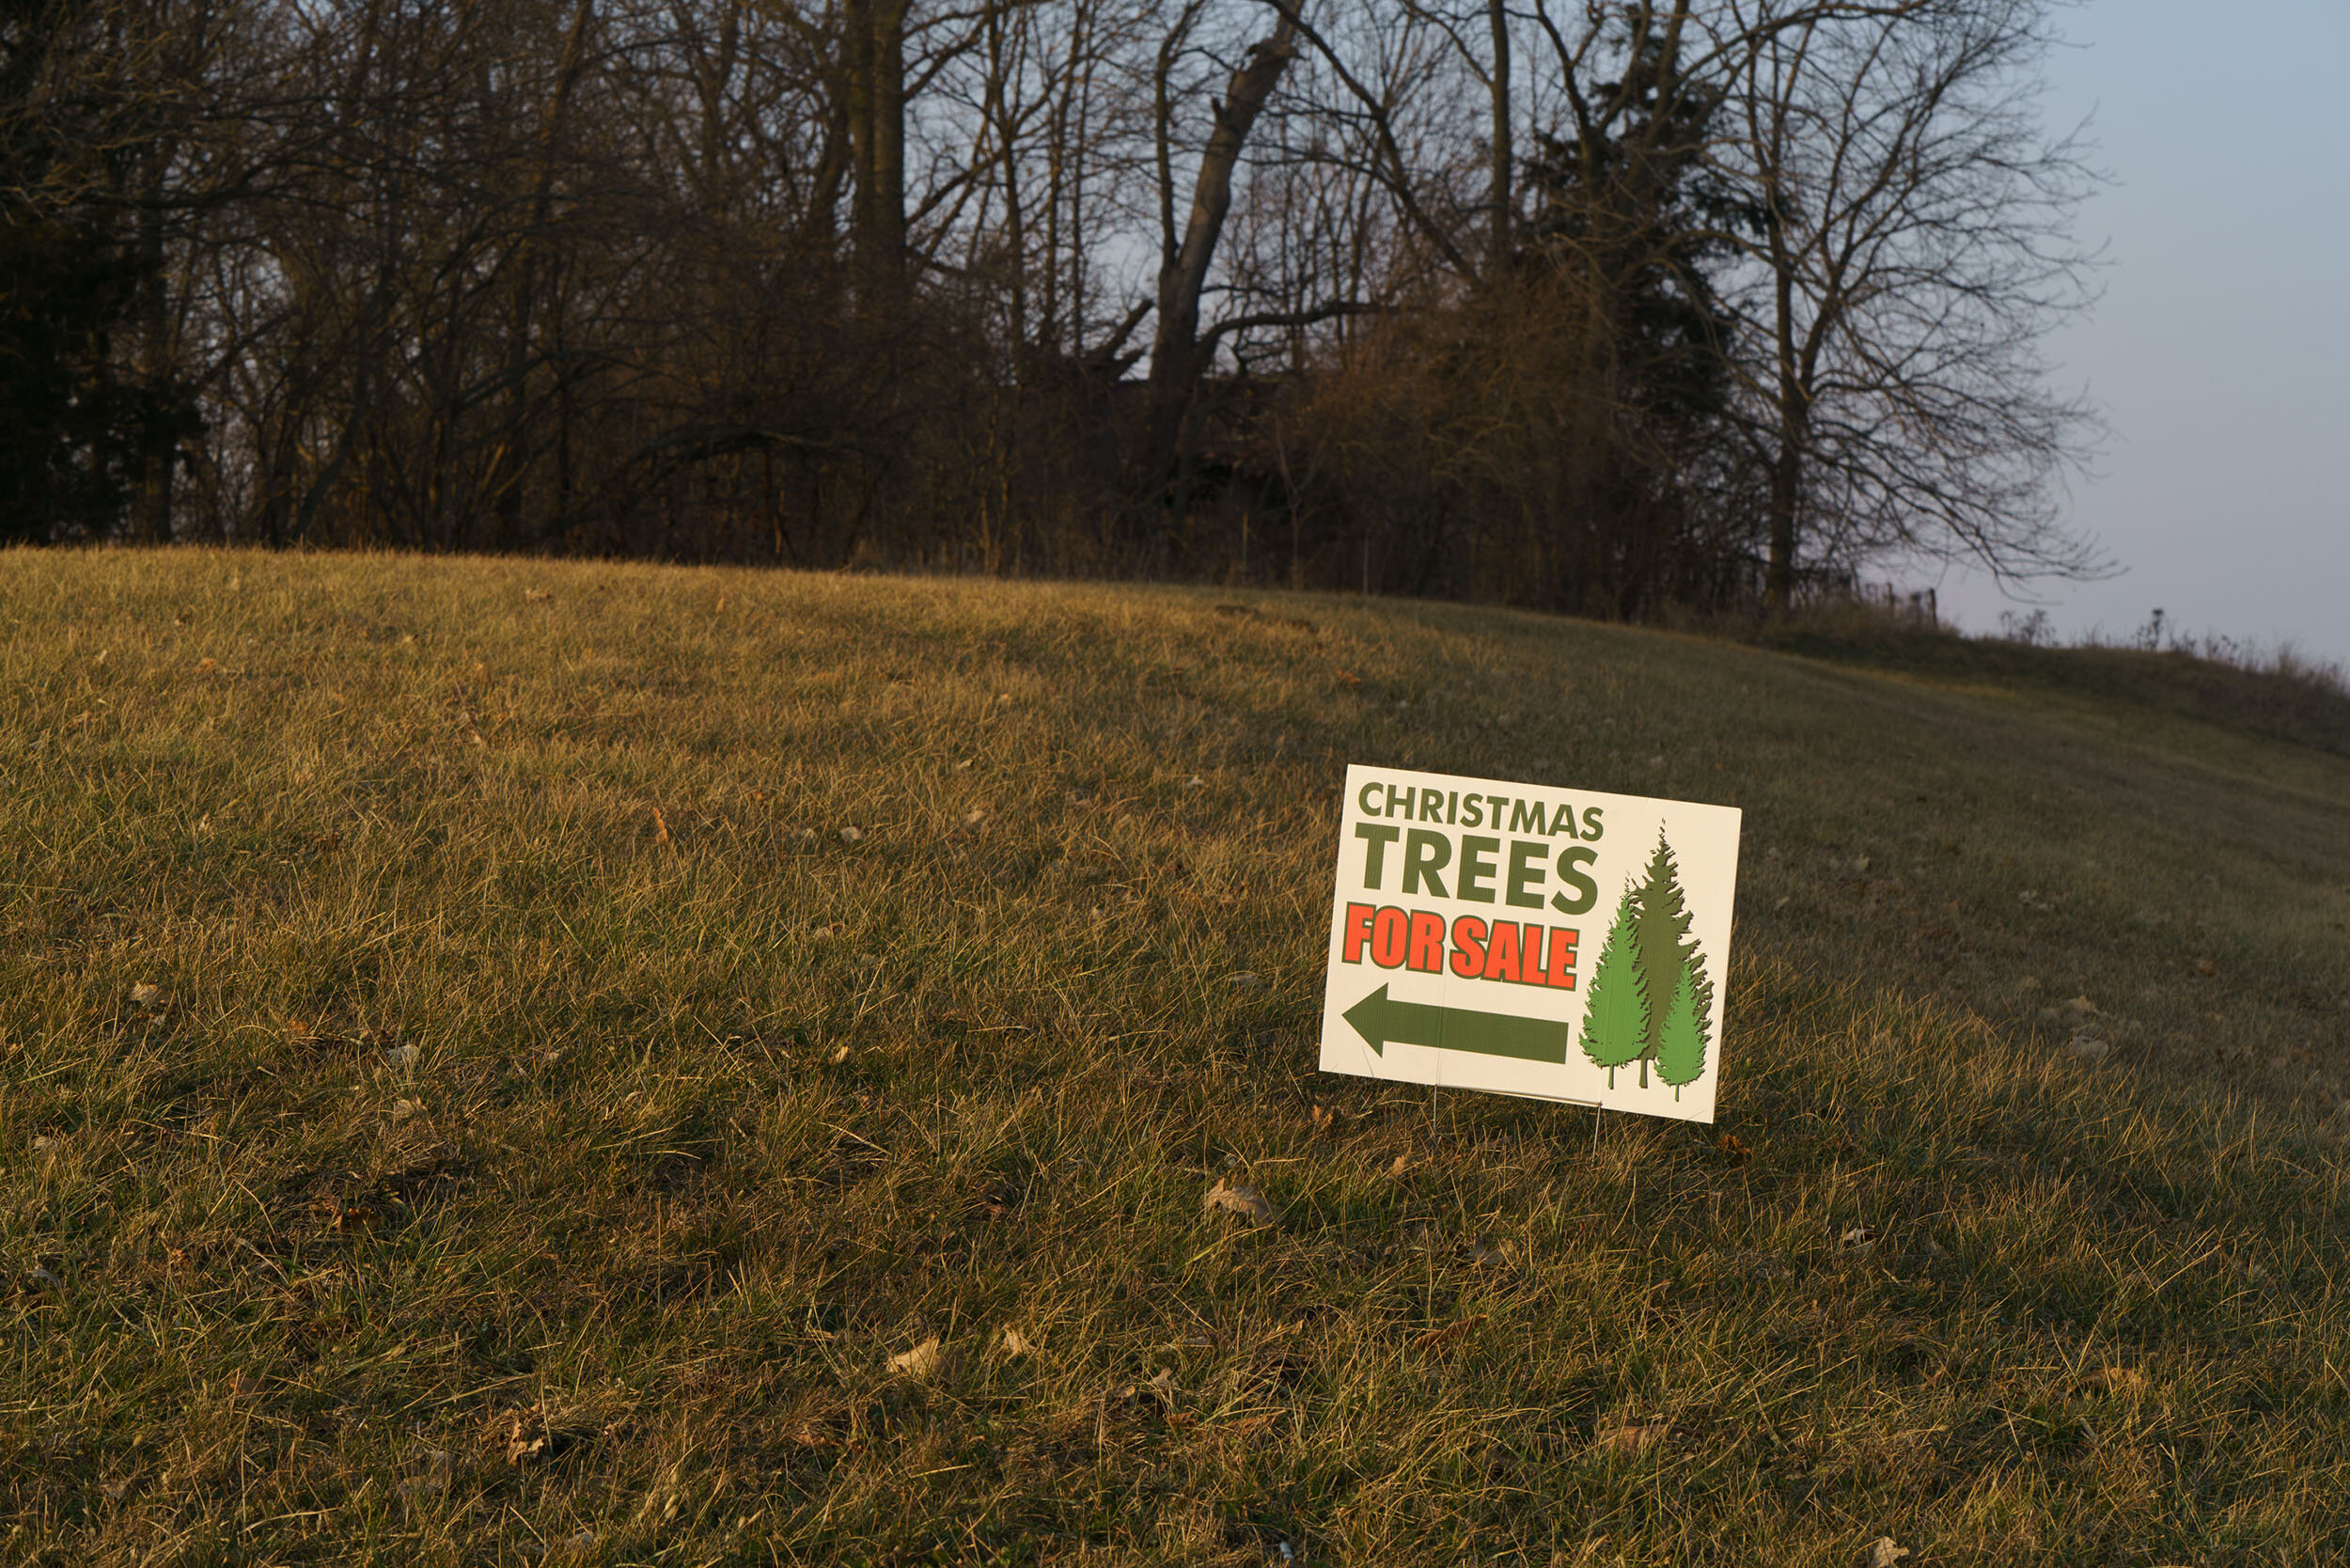  Dreamland Tree Farm has been open for 39 years. Patience is essential, it takes 6 years to grow a tree for sale. 